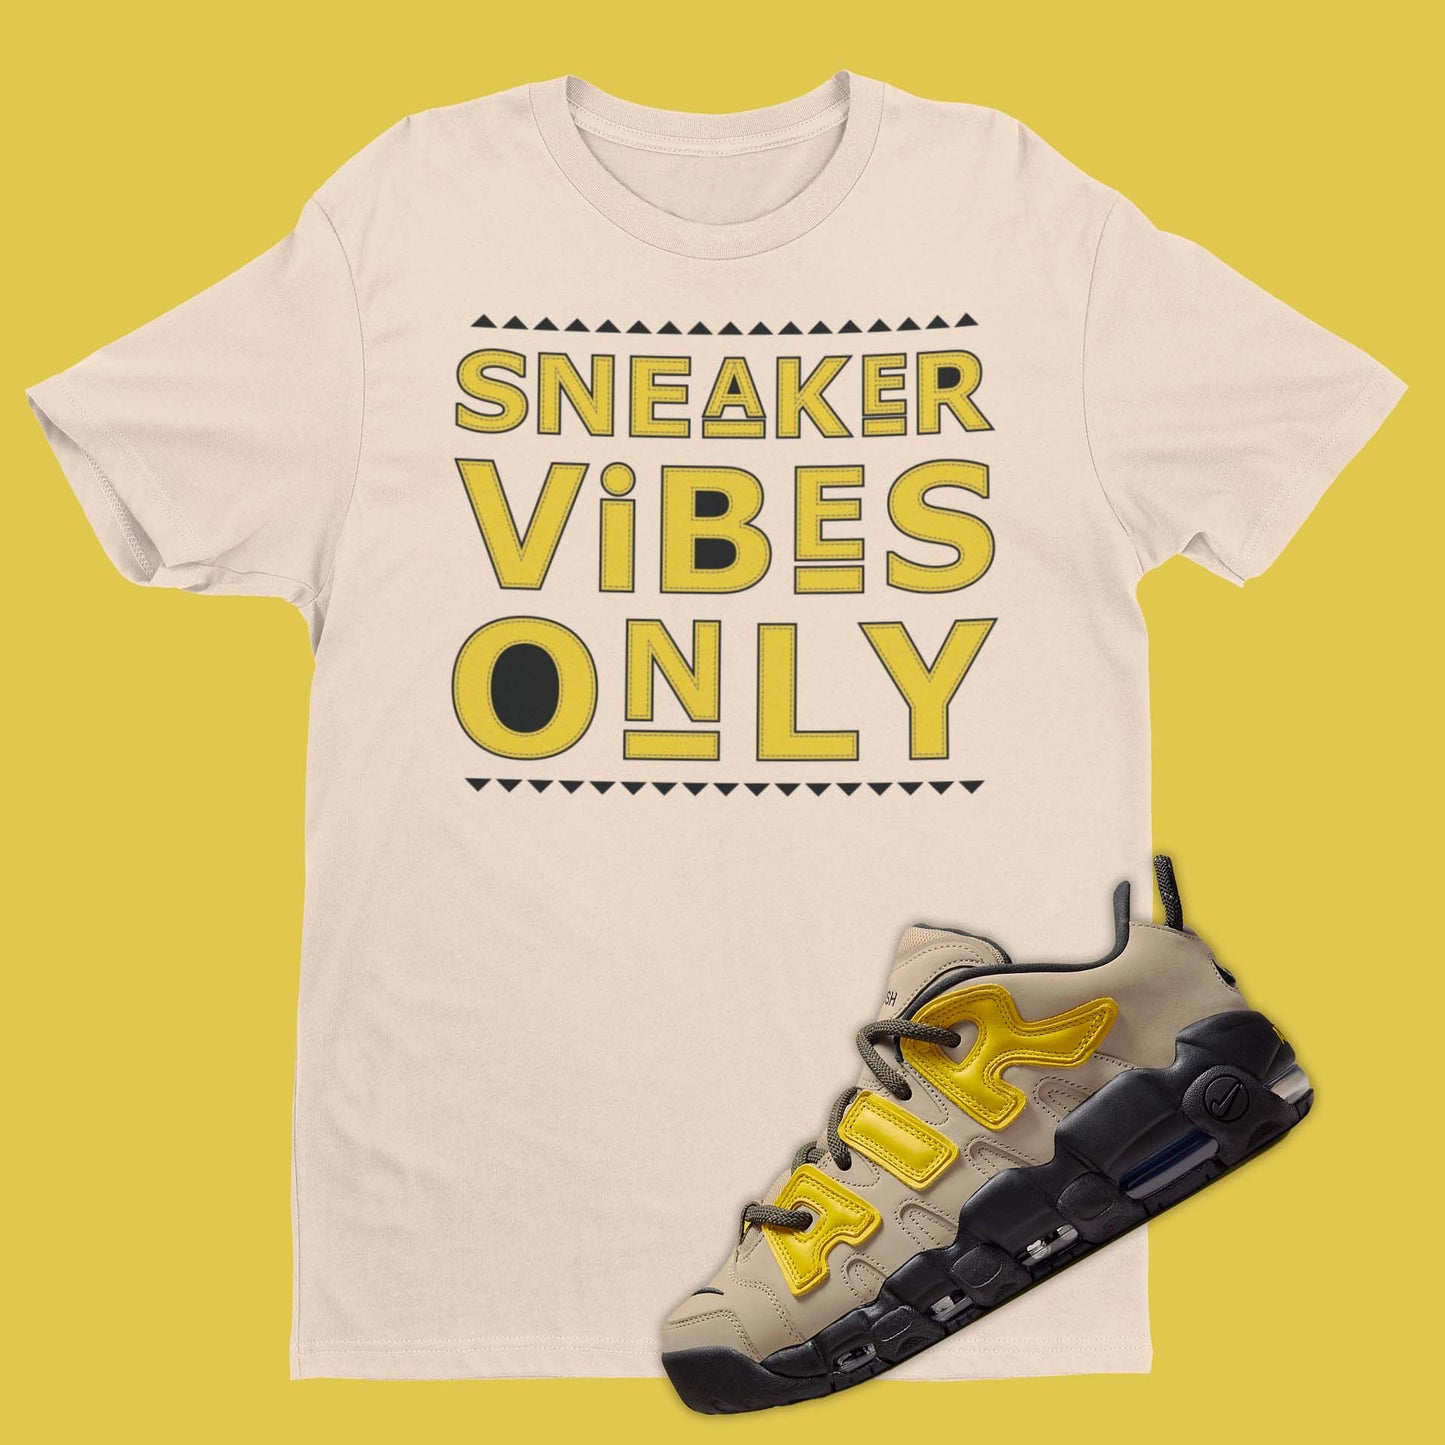 Sneaker Vibes Only Nike Air More Uptempo Ambush Limestone Matching T-Shirt from SNKADX